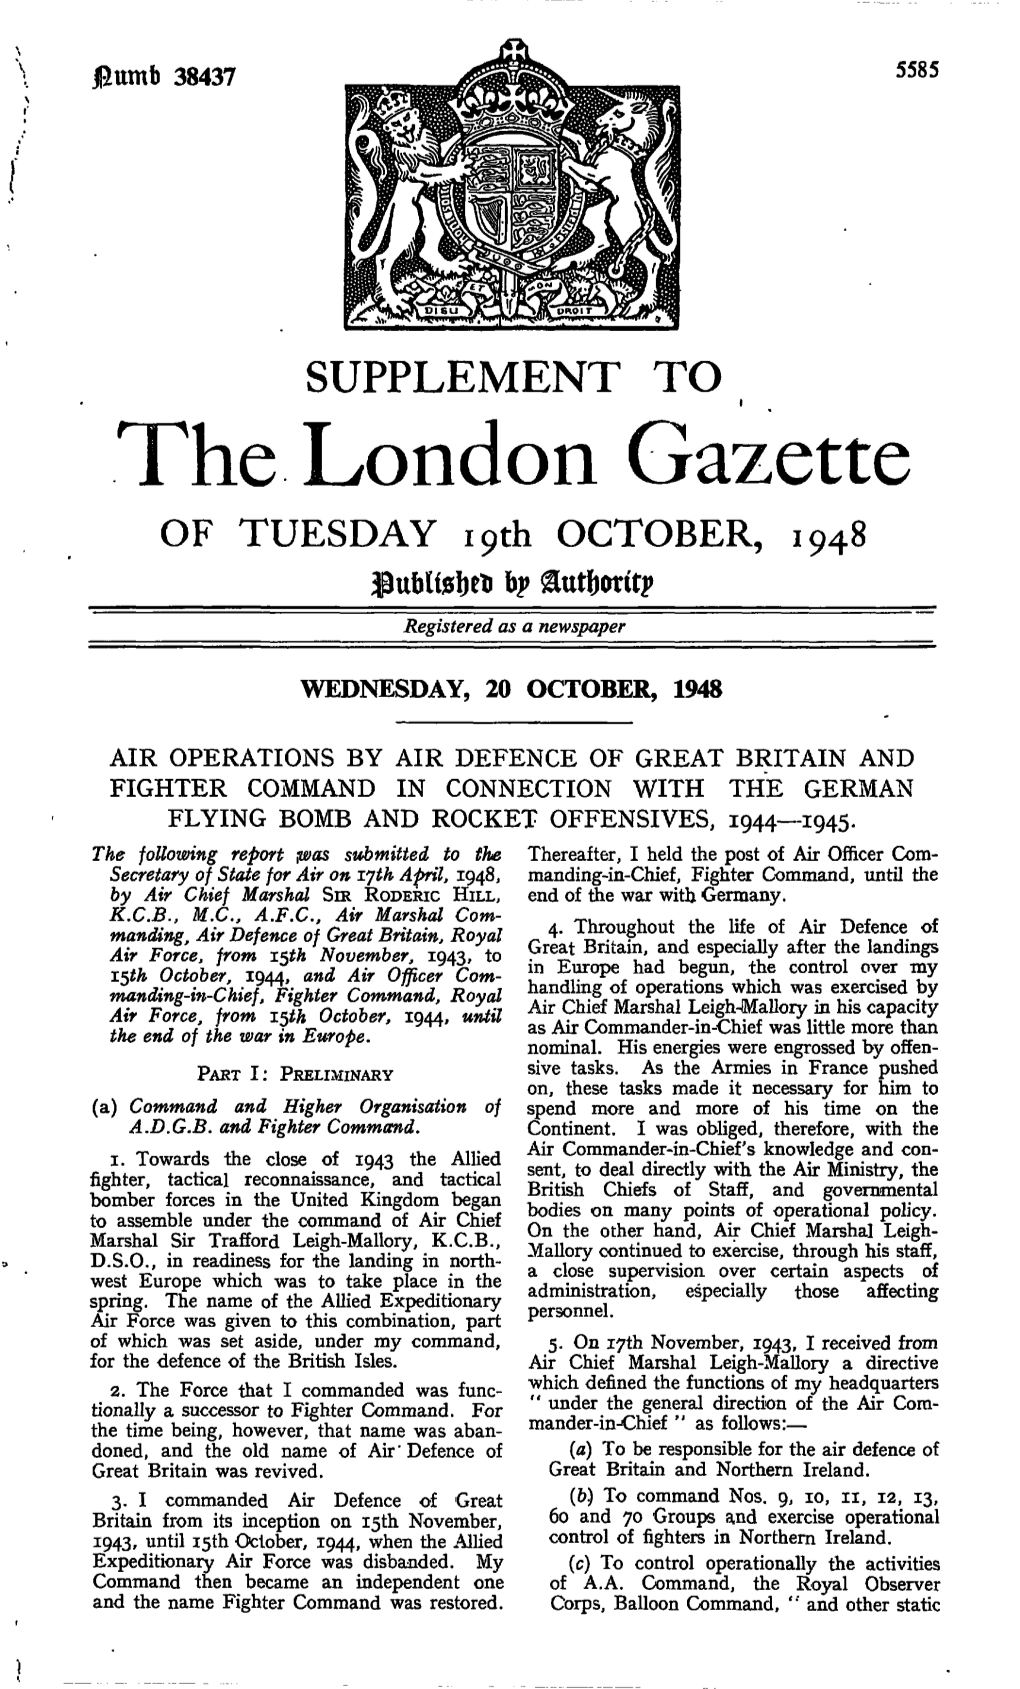 The London Gazette of TUESDAY I9th OCTOBER, 1948 B? Registered As a Newspaper